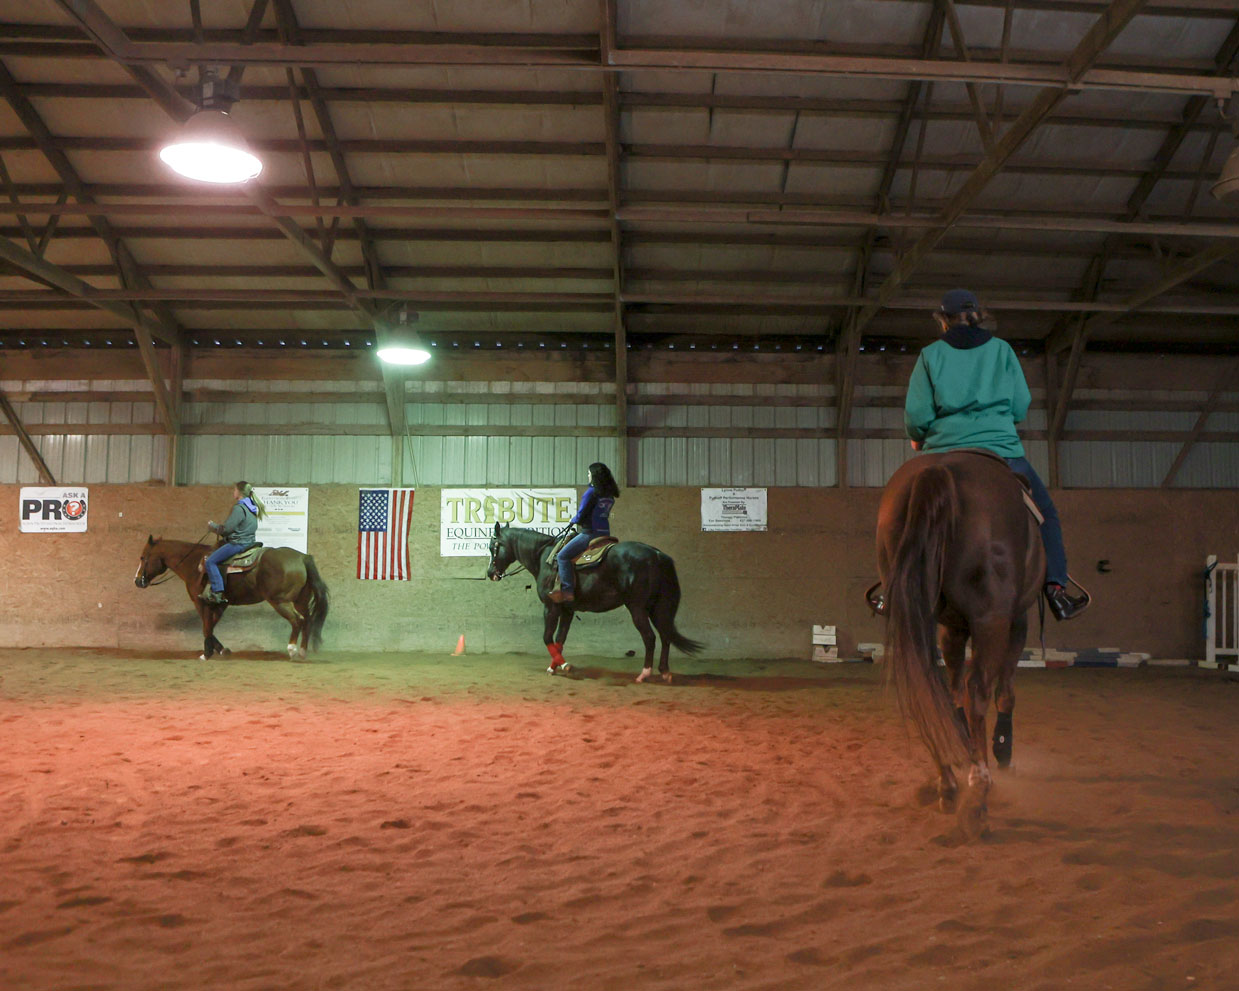 Three students each ride their horse around an arena